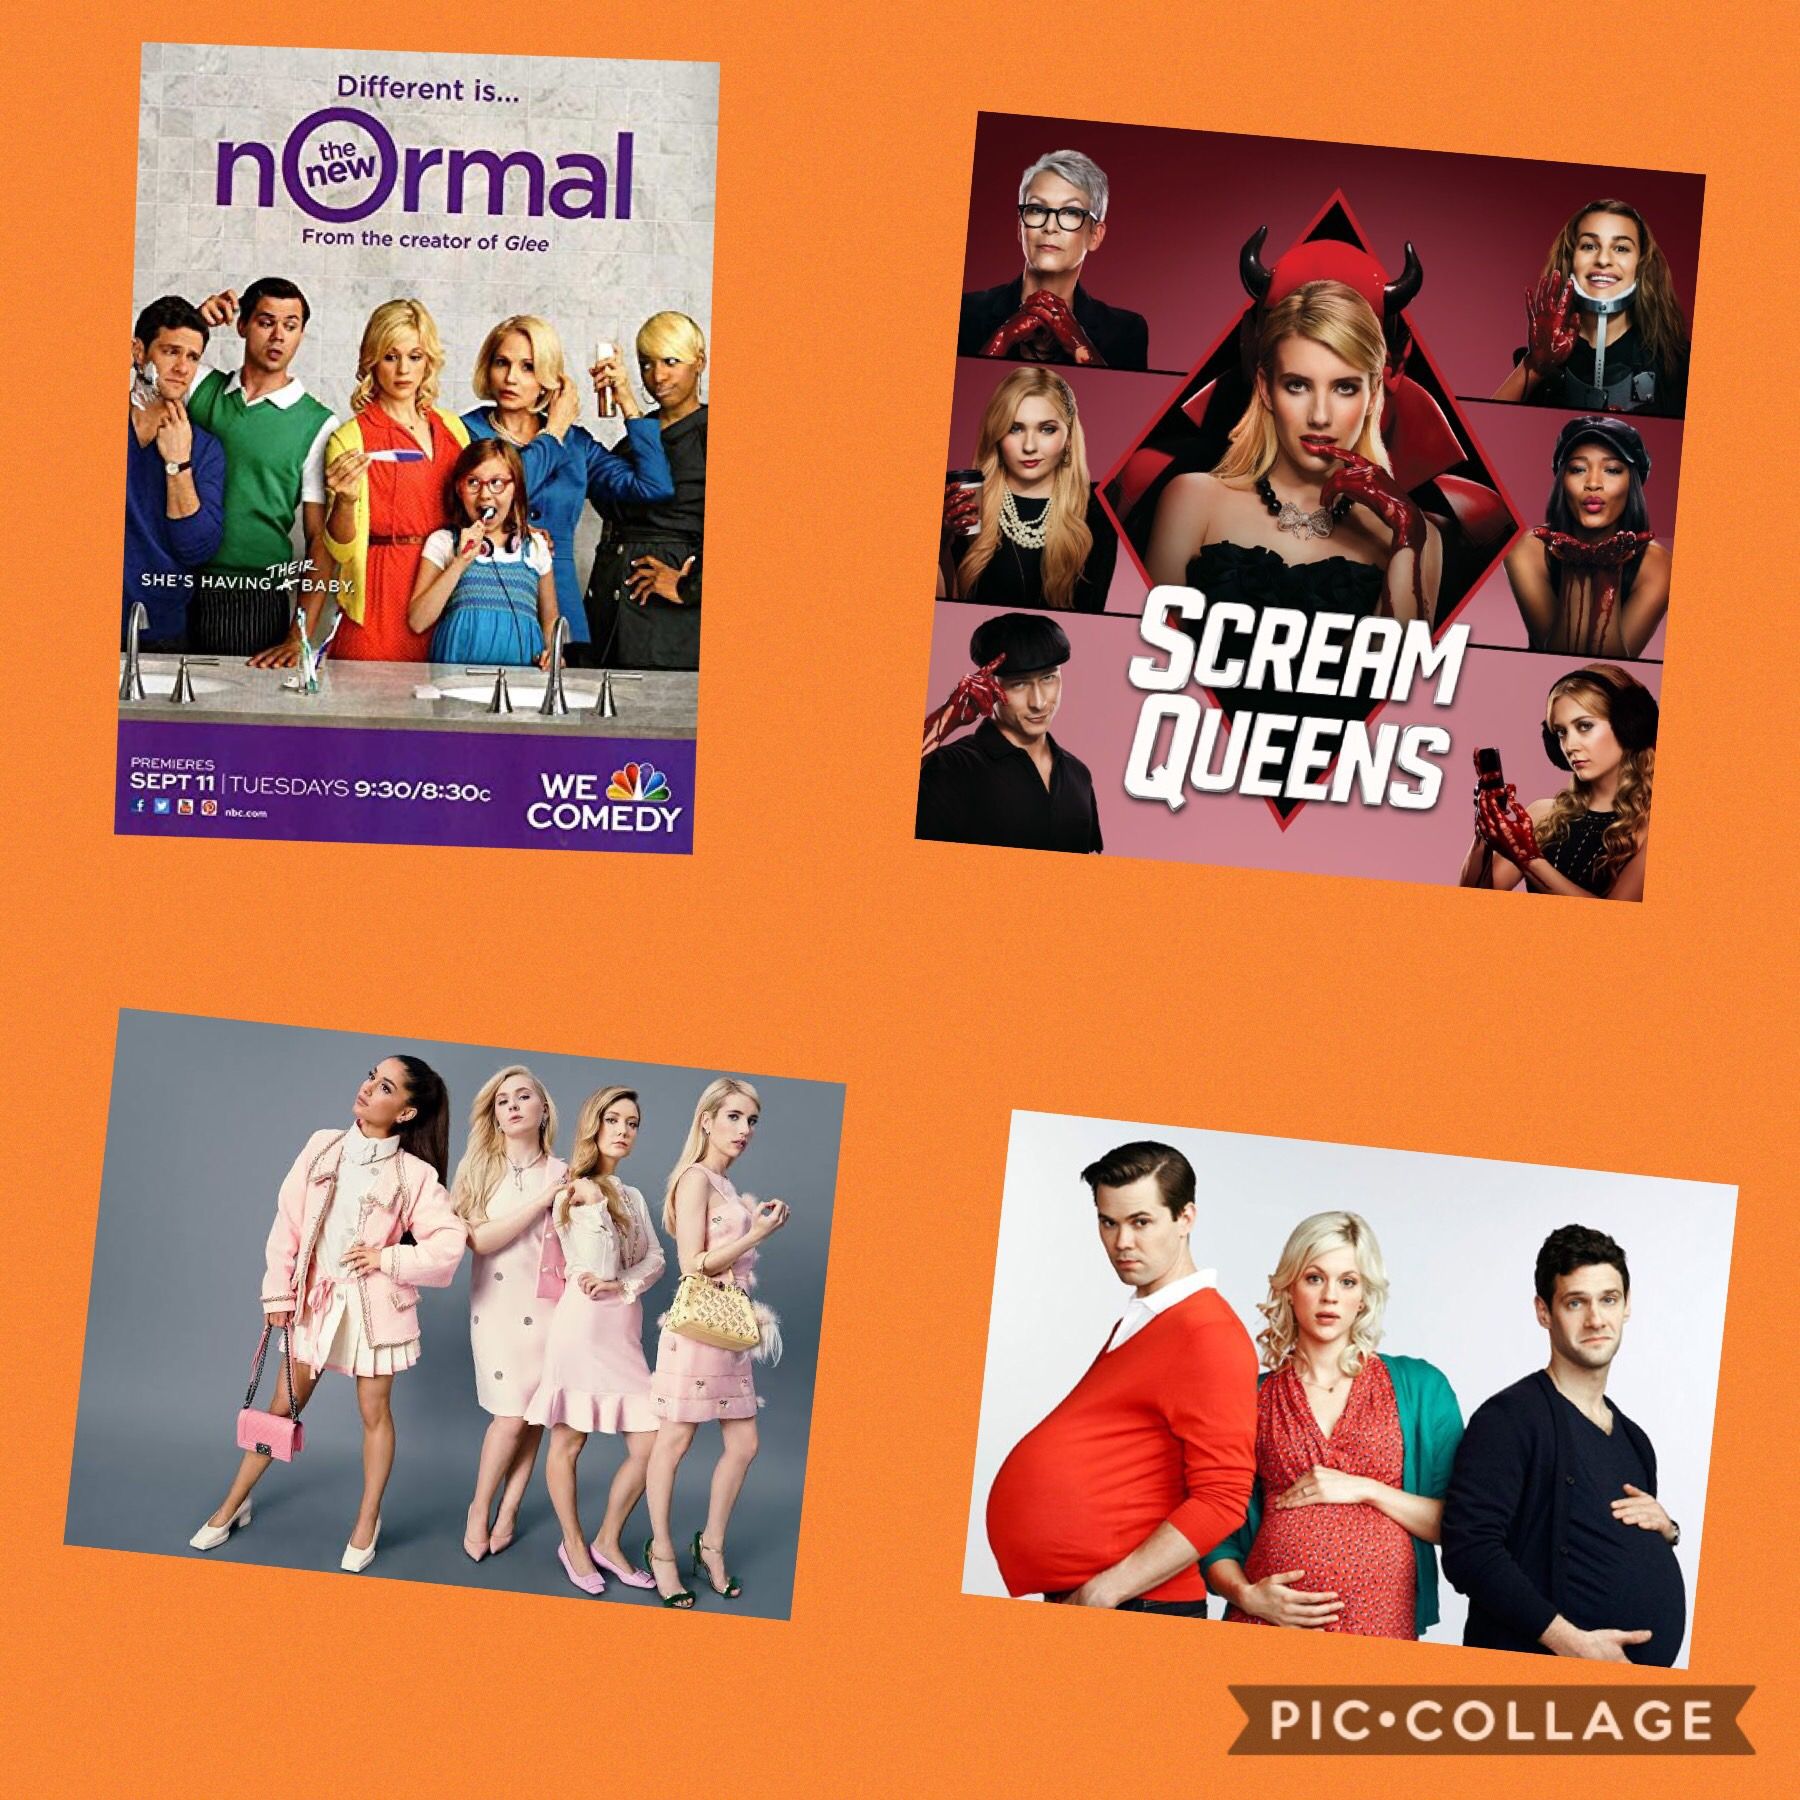 The New Normal and Scream Queens